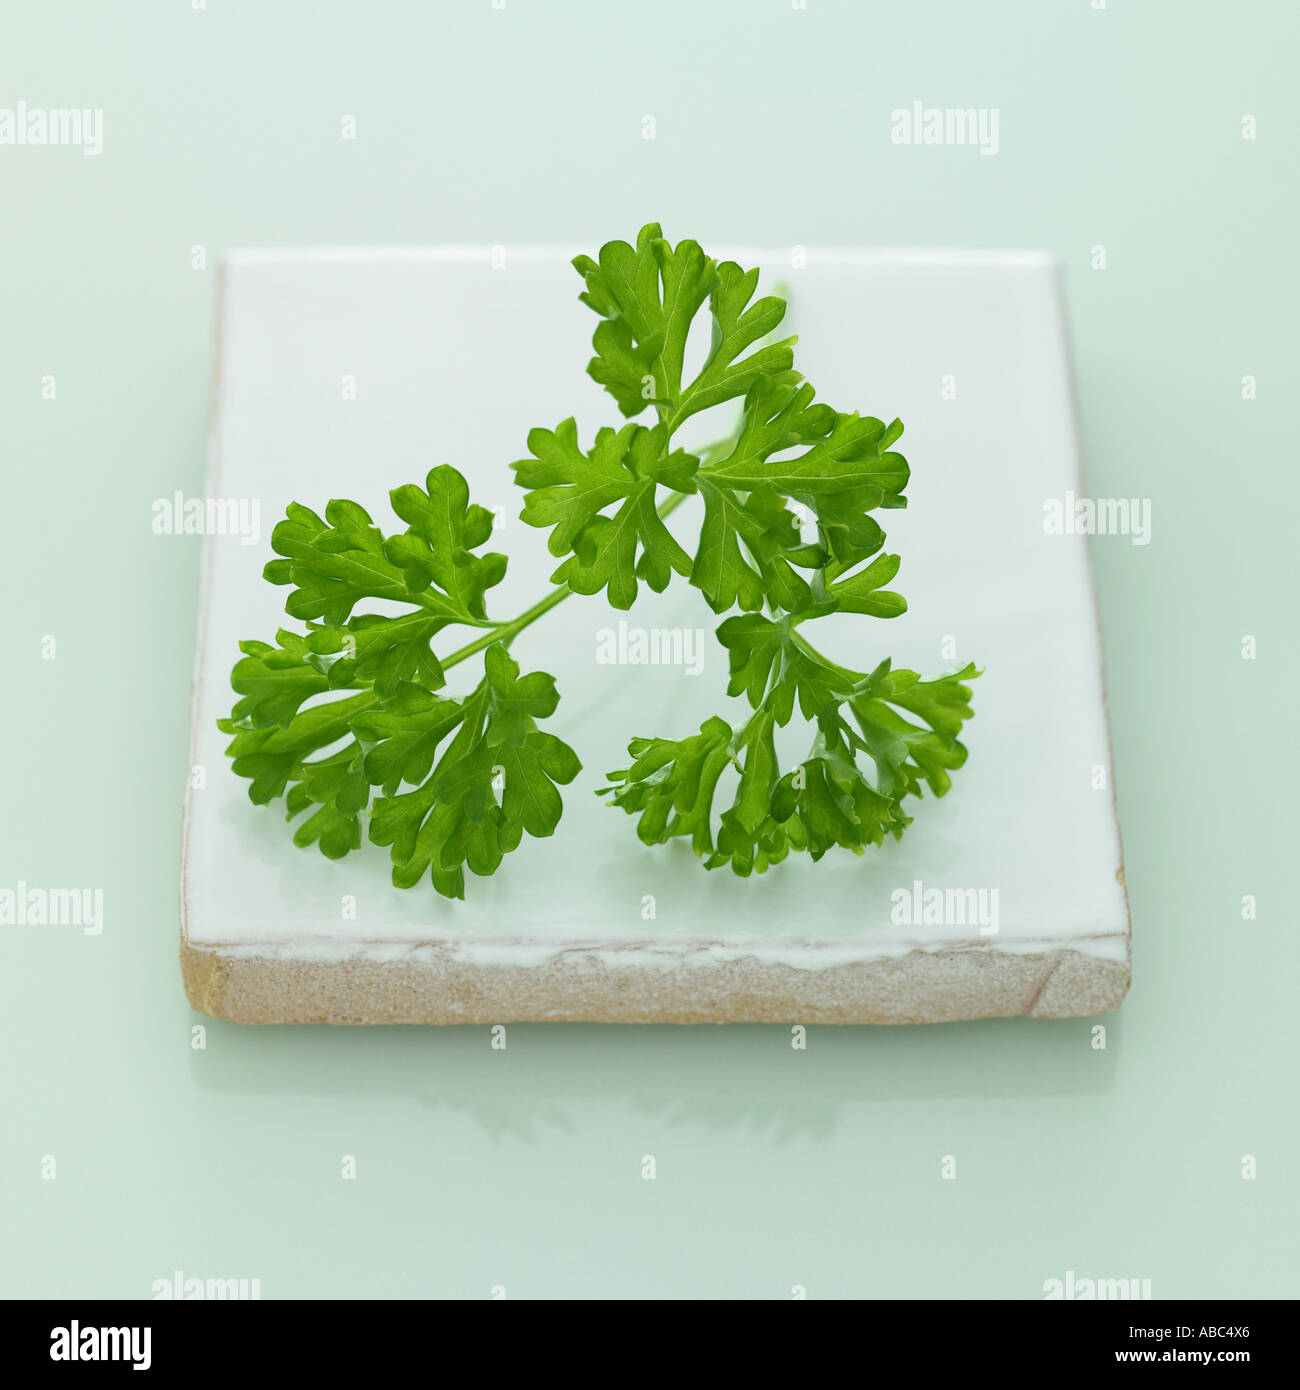 Parsley sprigs - one of a series of similar images of herbs Stock Photo